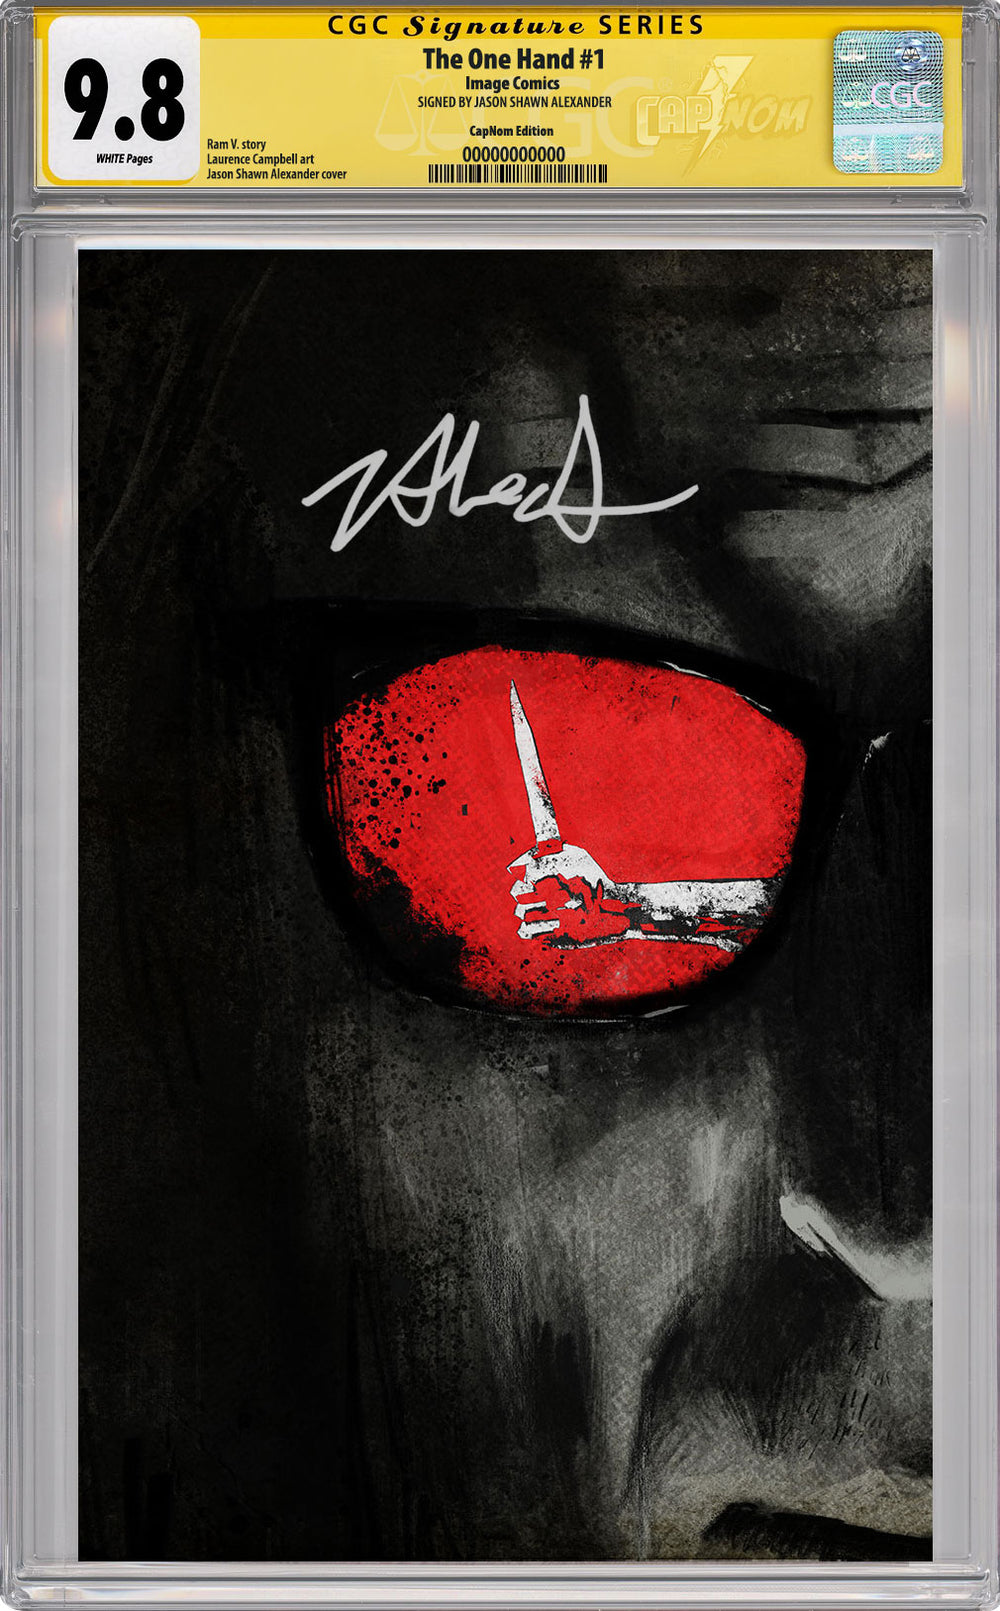 THE ONE HAND #1  “SHADE ROOM” C2E2 EXCLUSIVE CGC 9.8 SIGNED BY JASON SHAWN ALEXANDER